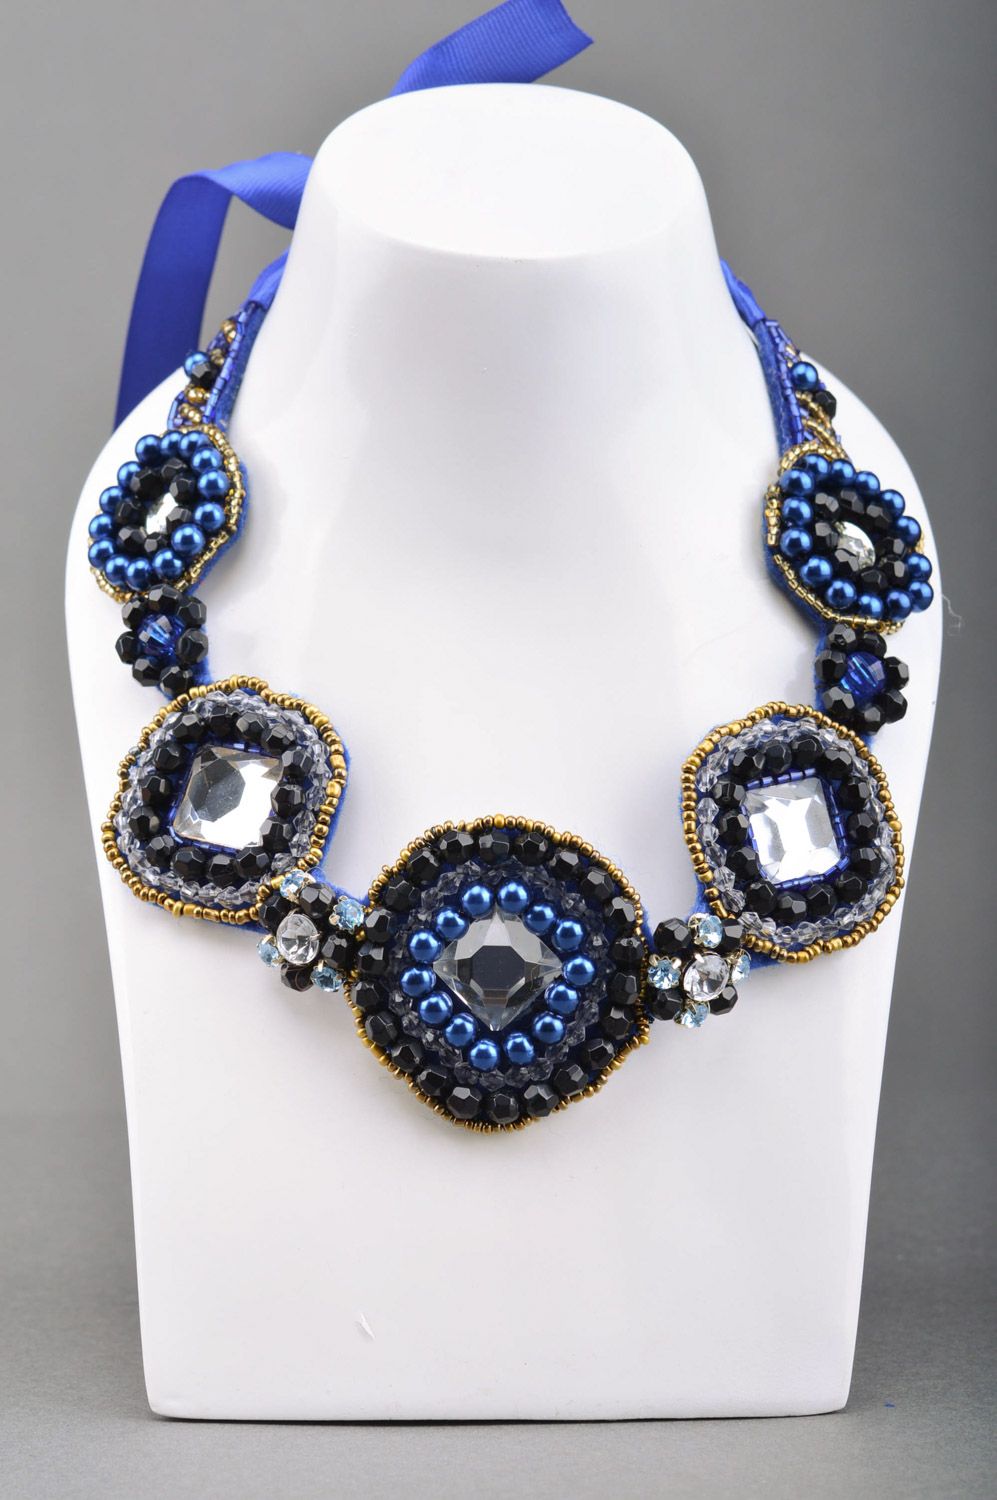 Elegant handmade bead embroidered collar necklace in blue colors 1001 nights photo 1